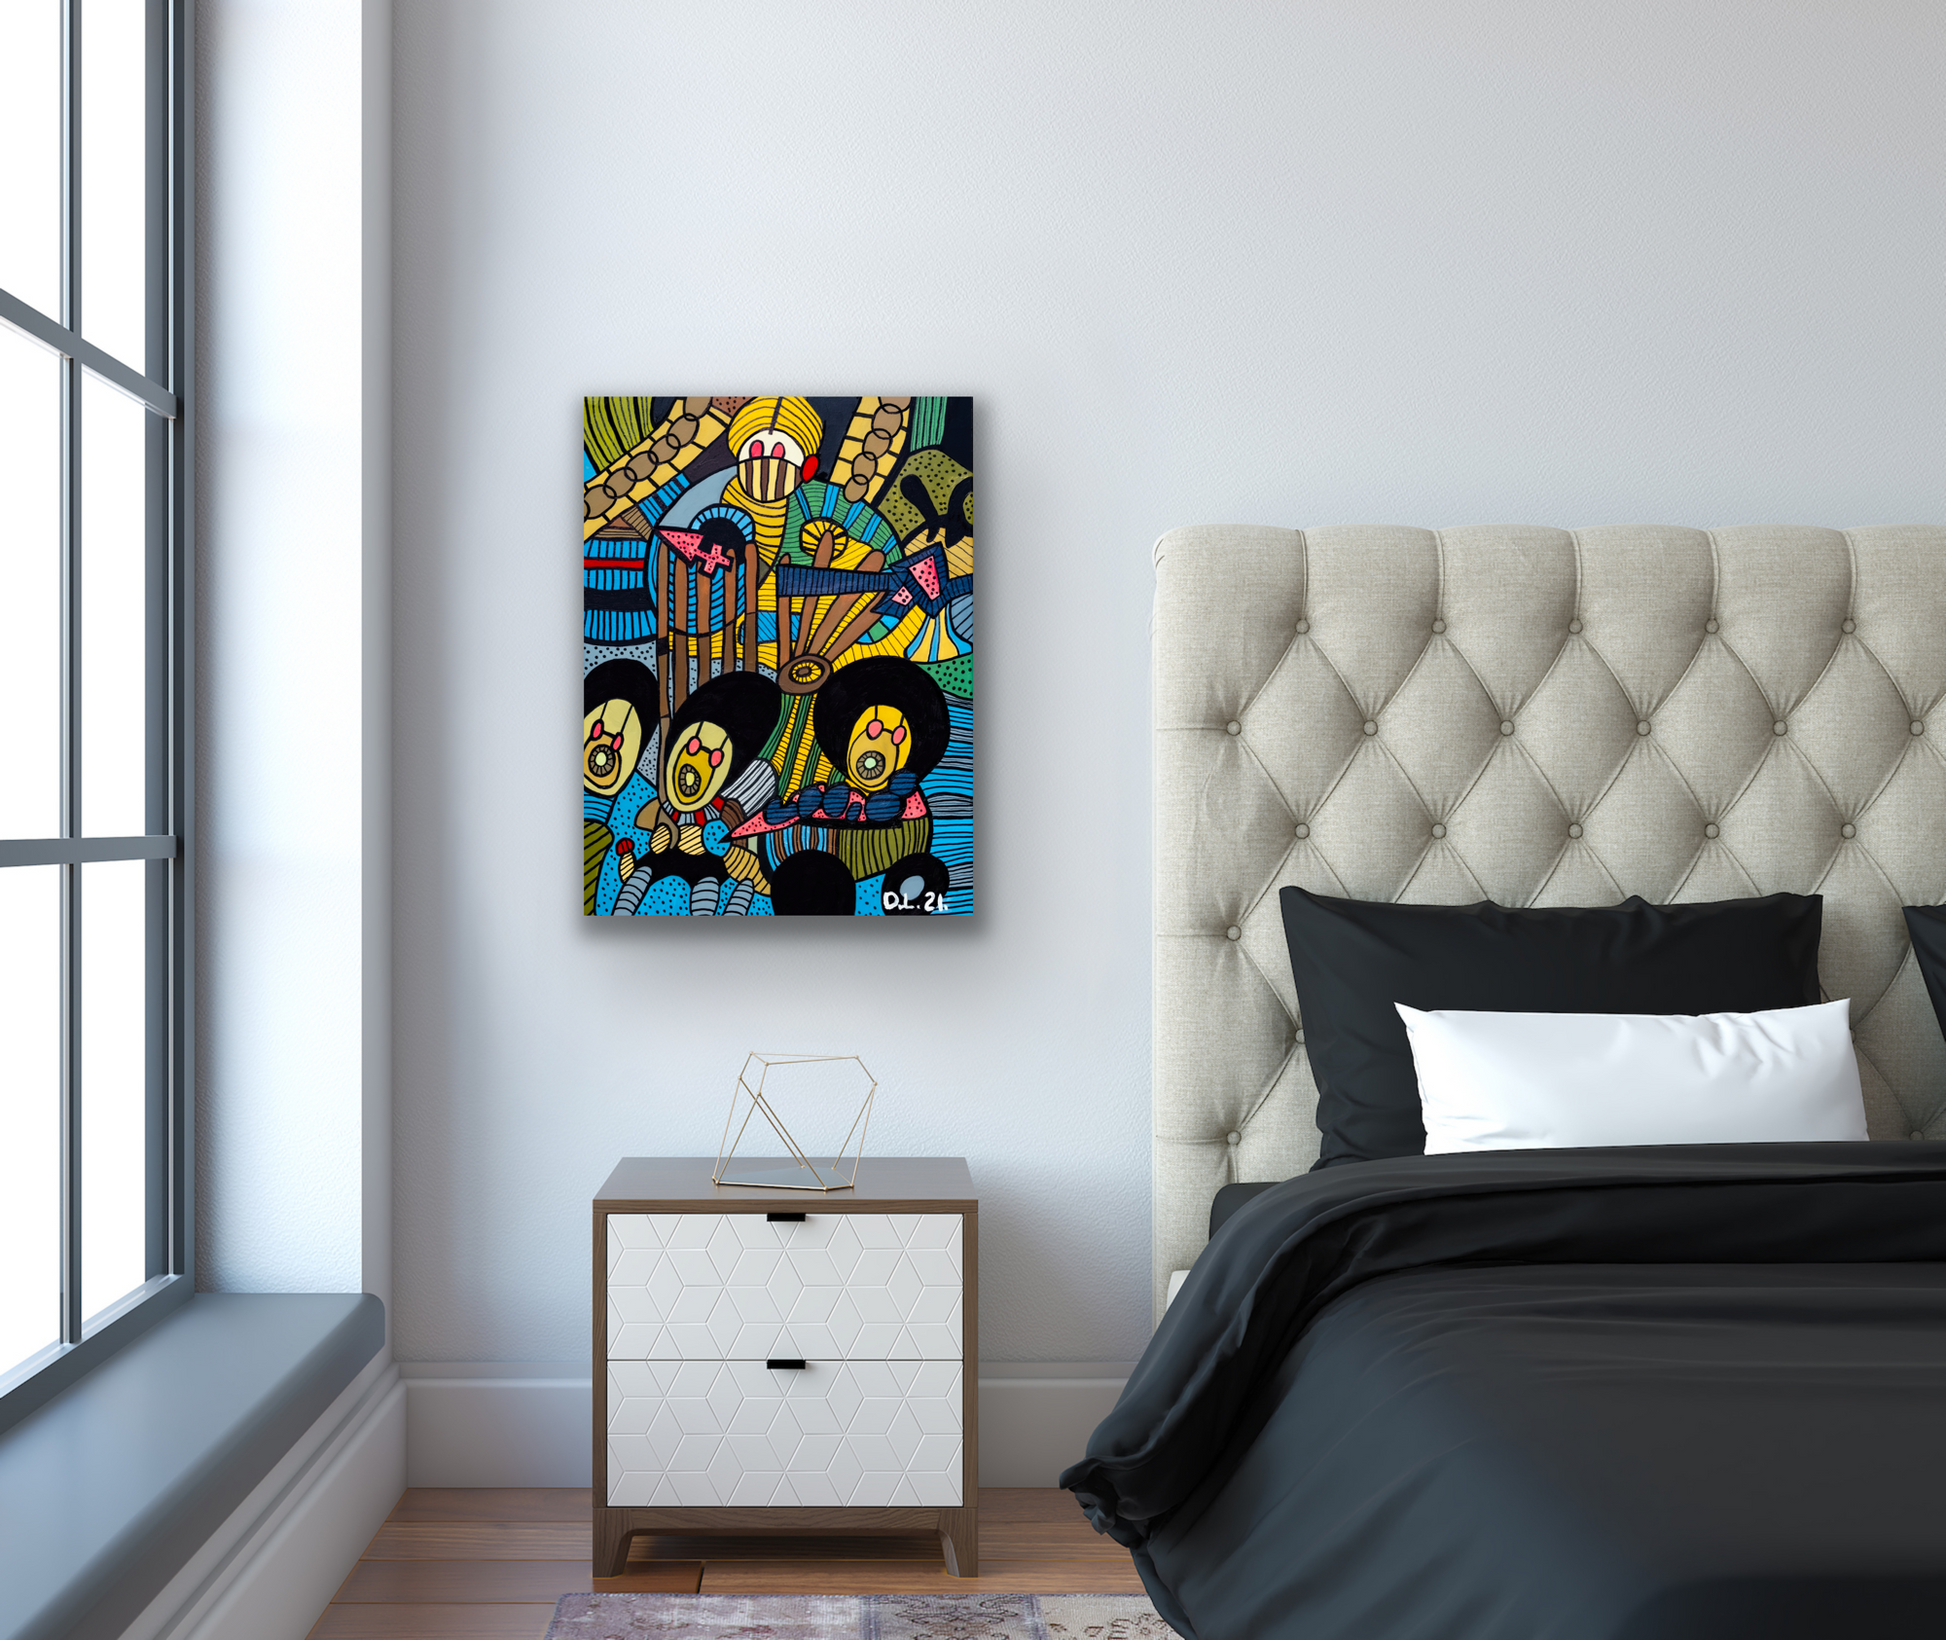 Fortune Tella work of art comes in three canvas print sizes to fit your wall perfectly.